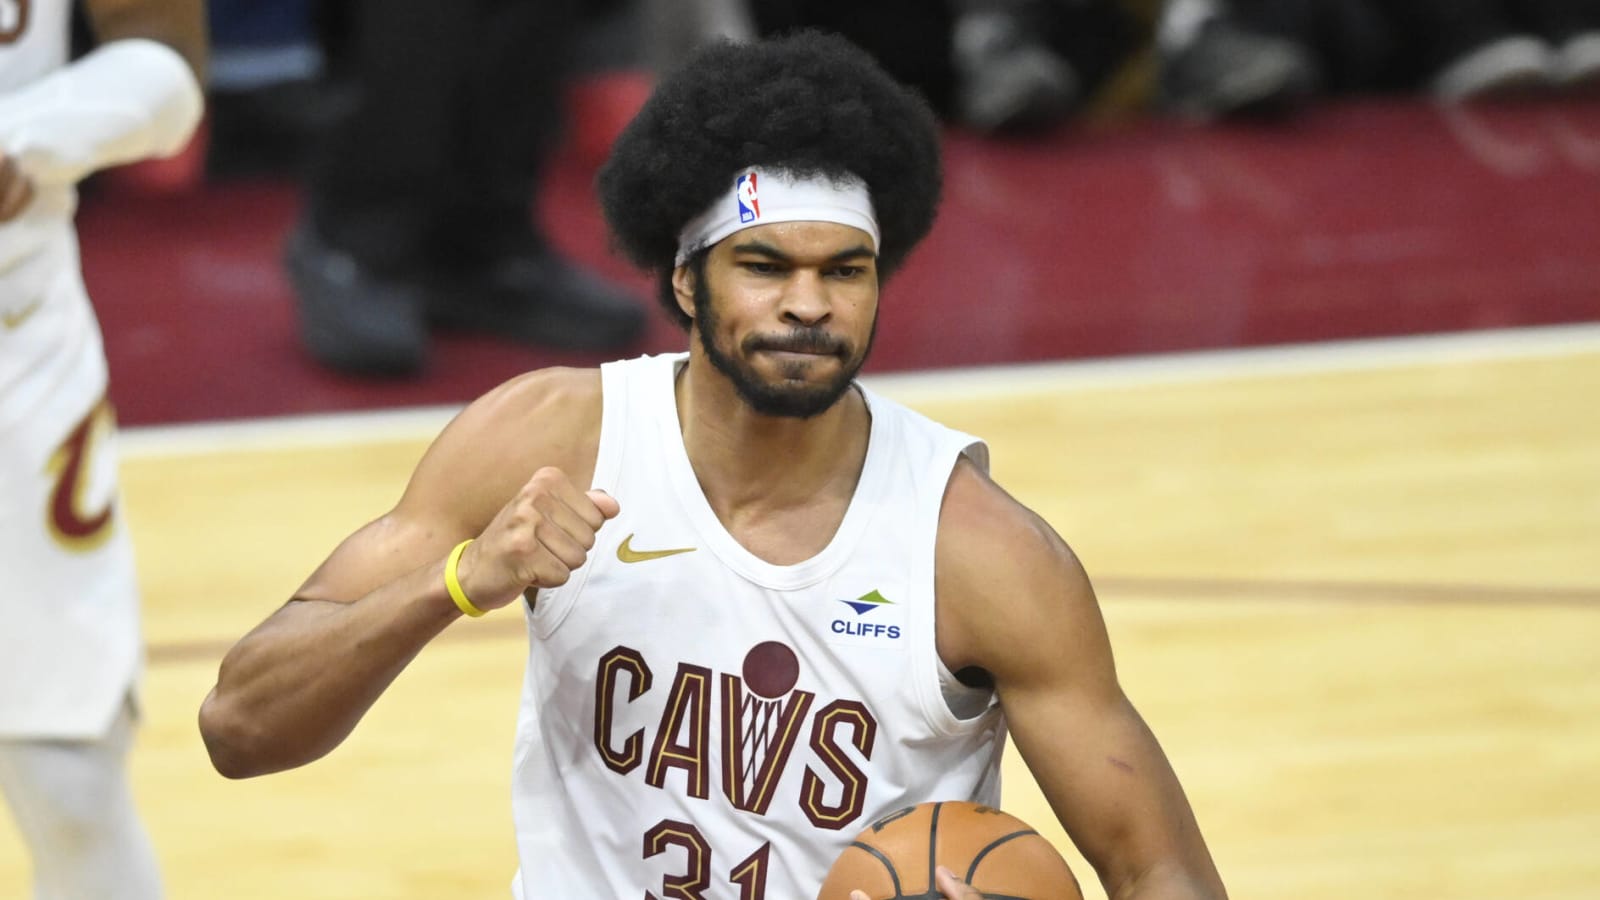 Could Cavaliers look to trade reliable center this offseason?